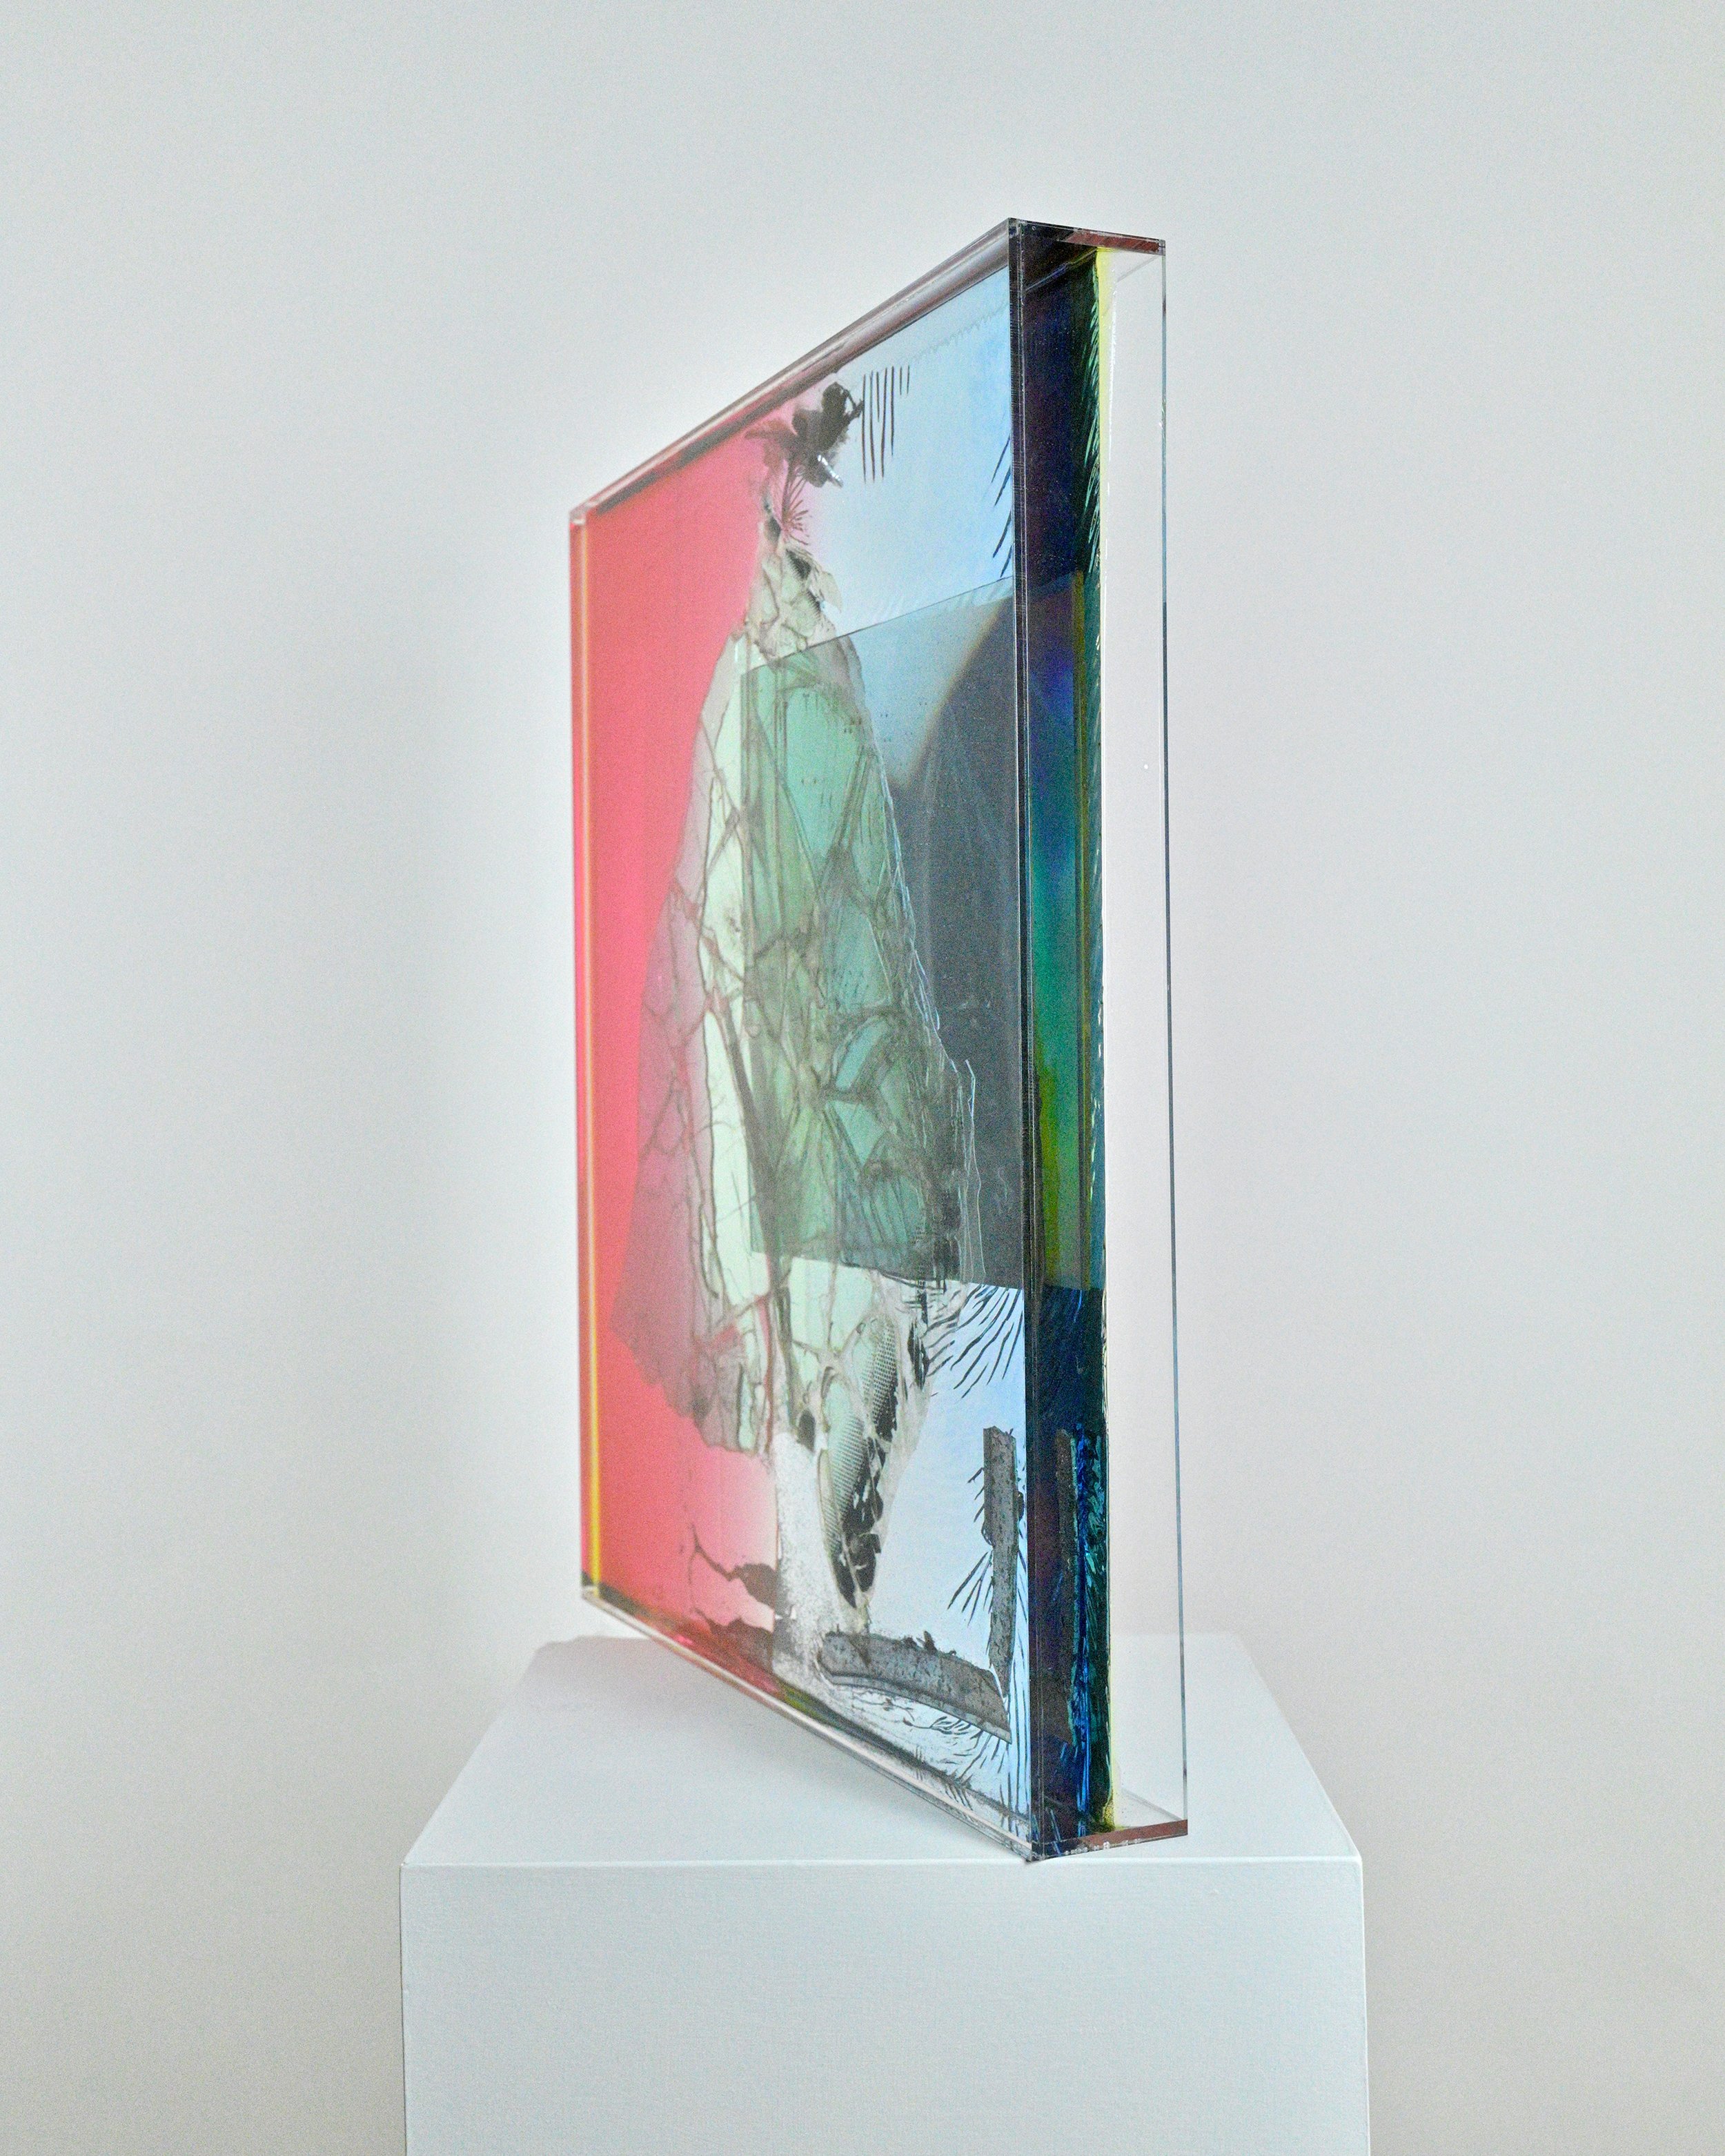   Bell  (side view), Double layered salvaged windshield glass, salvaged parts, film, resin, 27” x 25” x variable, 2021-2022 